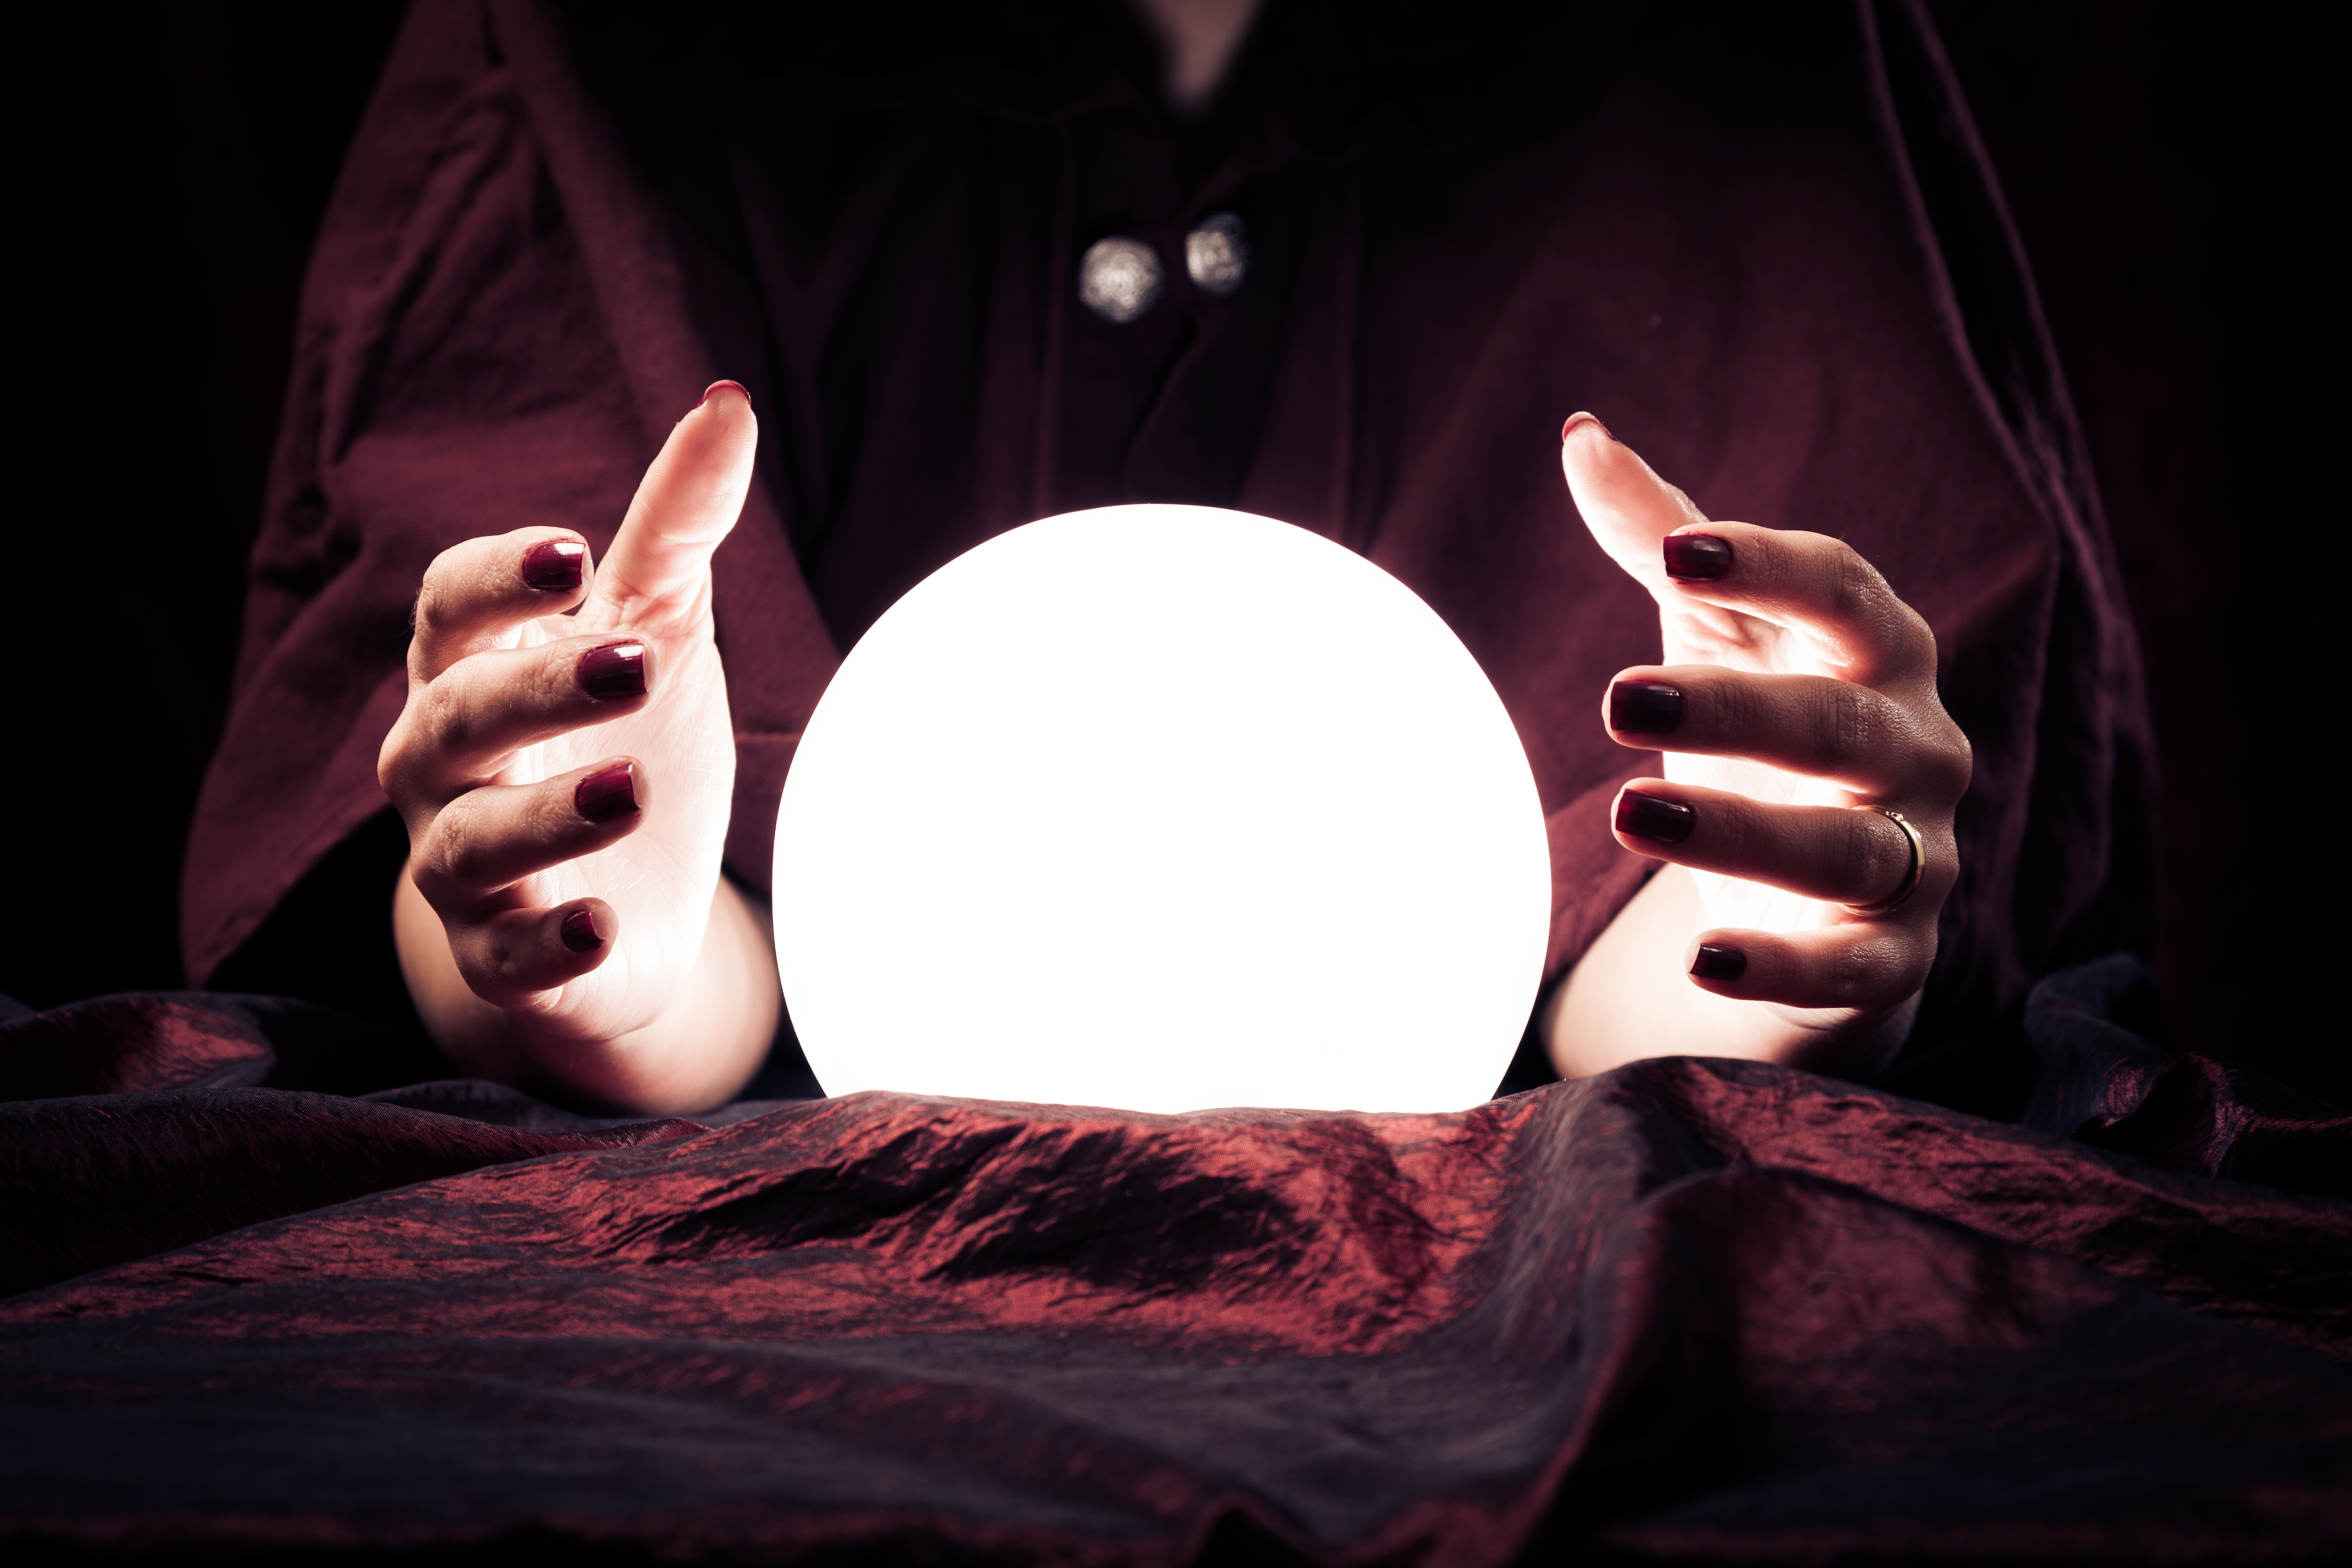 Manicured fortune teller’s hands hover around a glowing crystal ball.